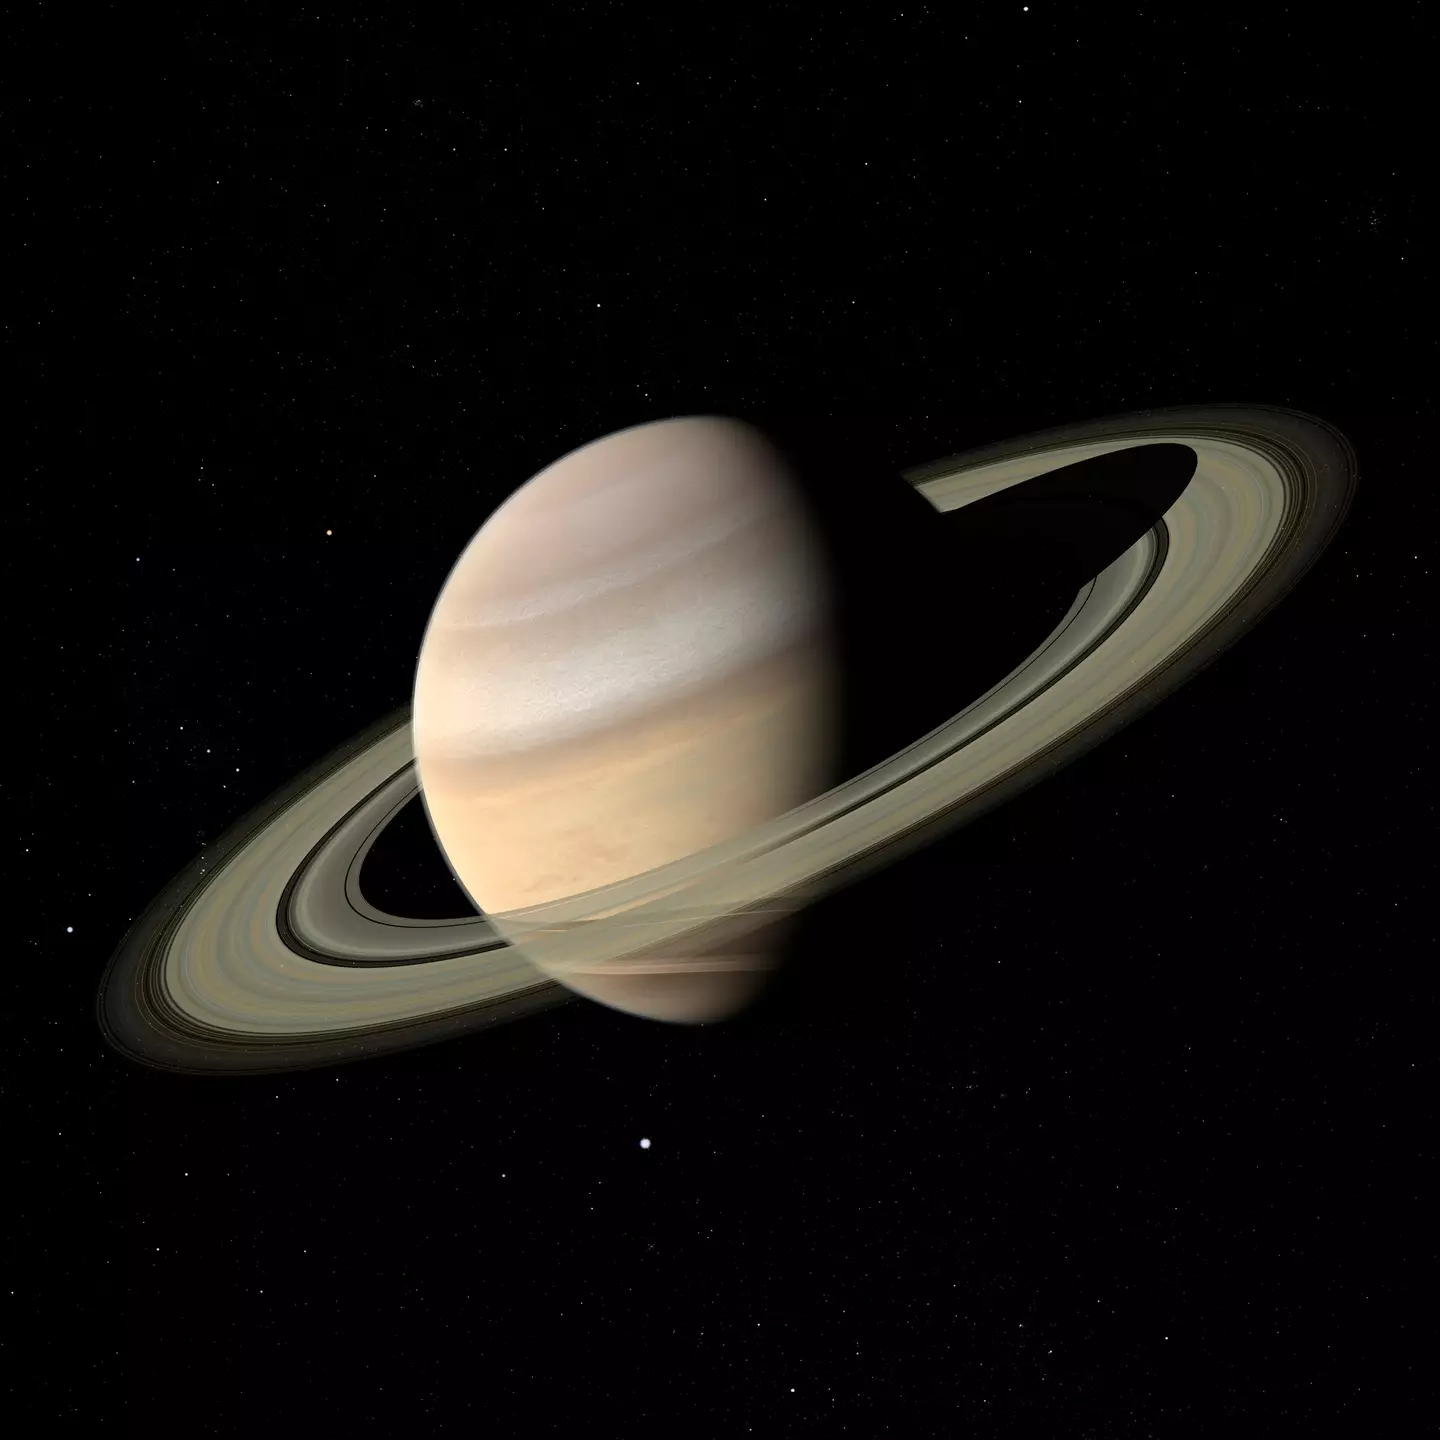 Enjoy Saturn's rings as long as they last, although that's going to be longer than you or I.